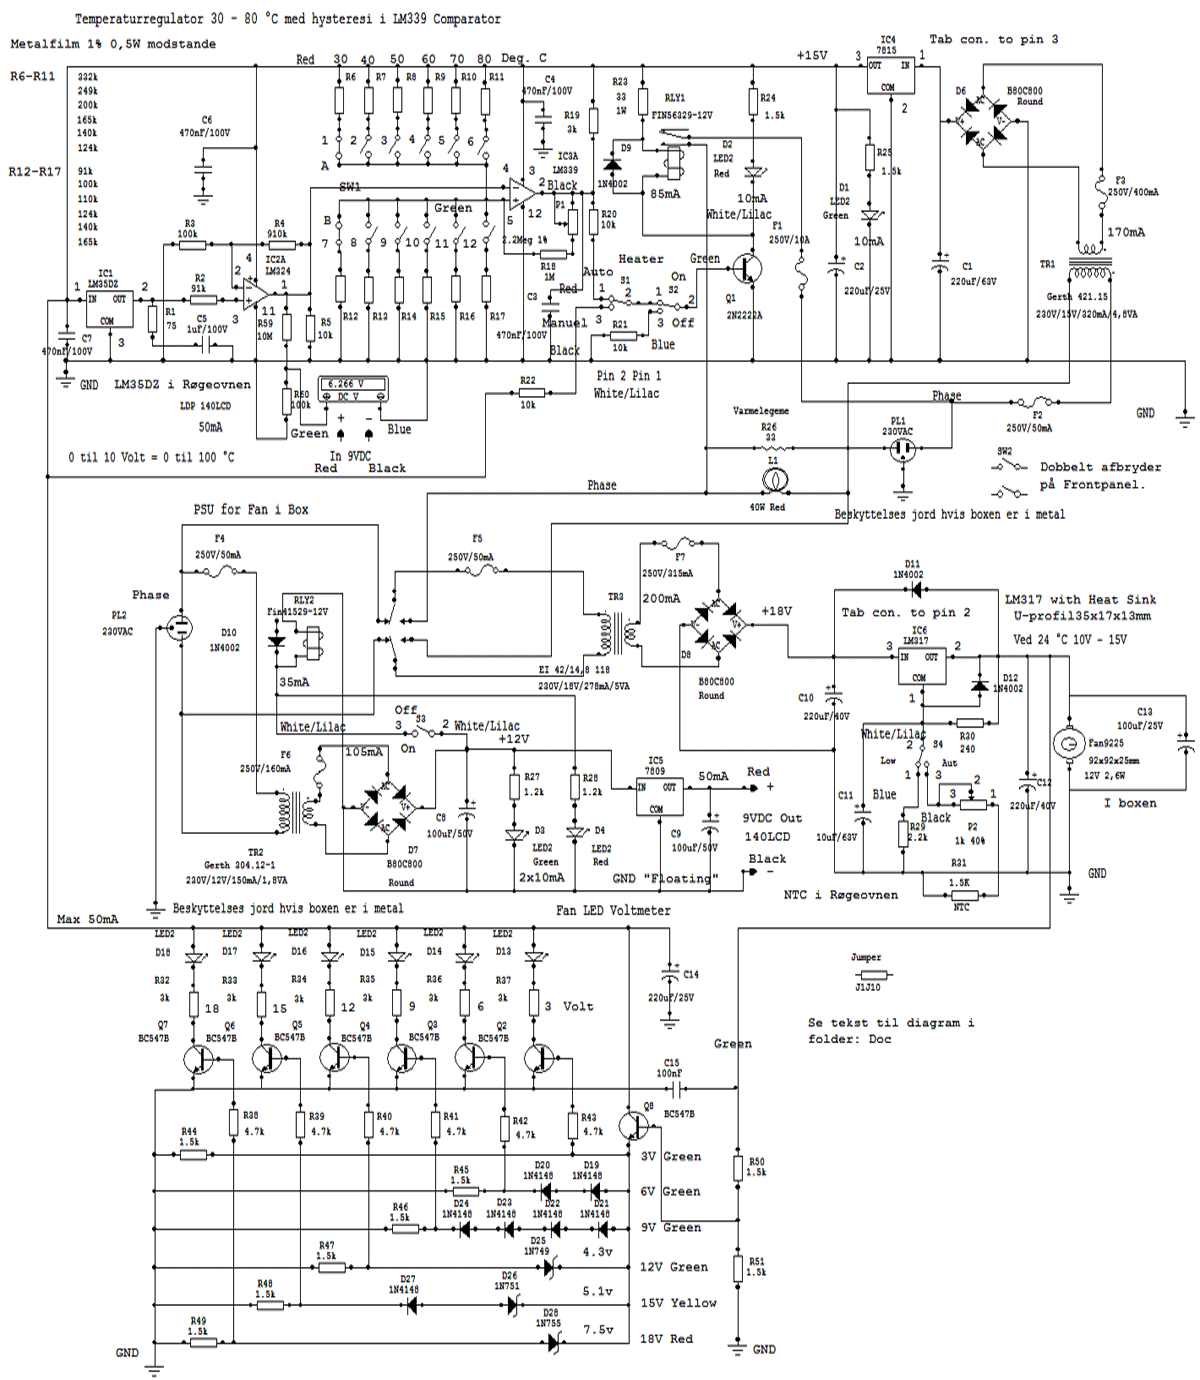 Diagram over Temperature Controller for Smoking-Chamber